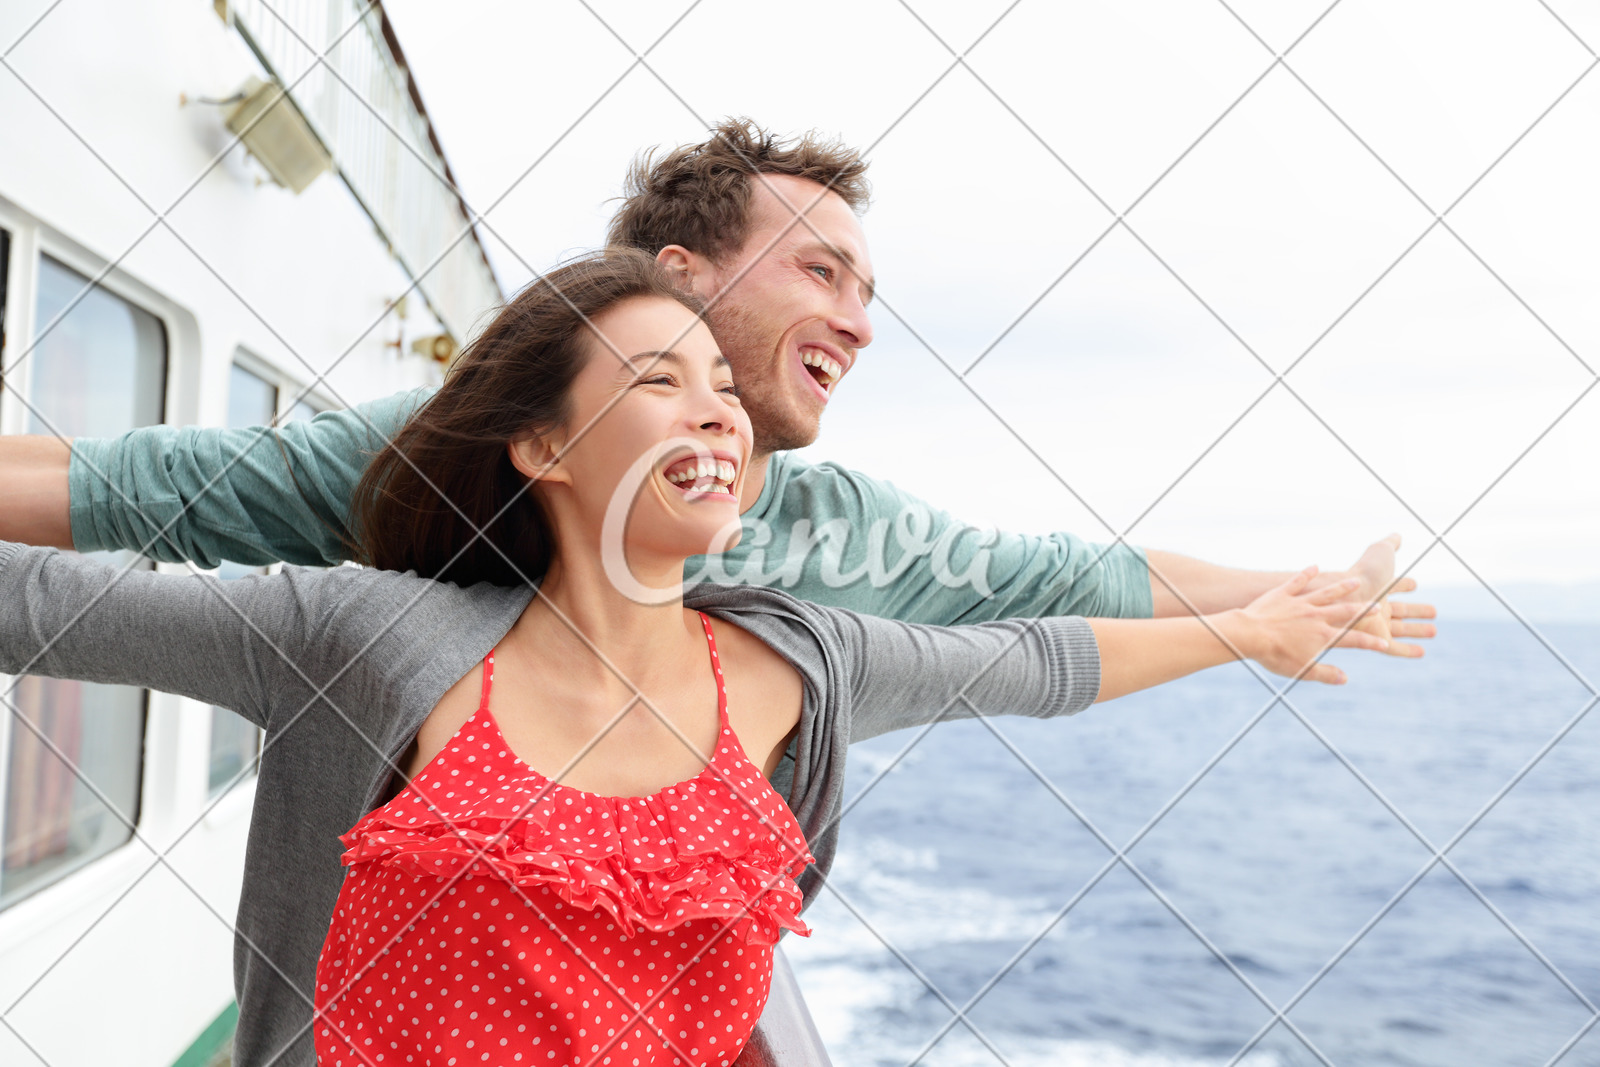 Romantic Couple Fun In Funny Pose On Cruise Ship Photos By Canva